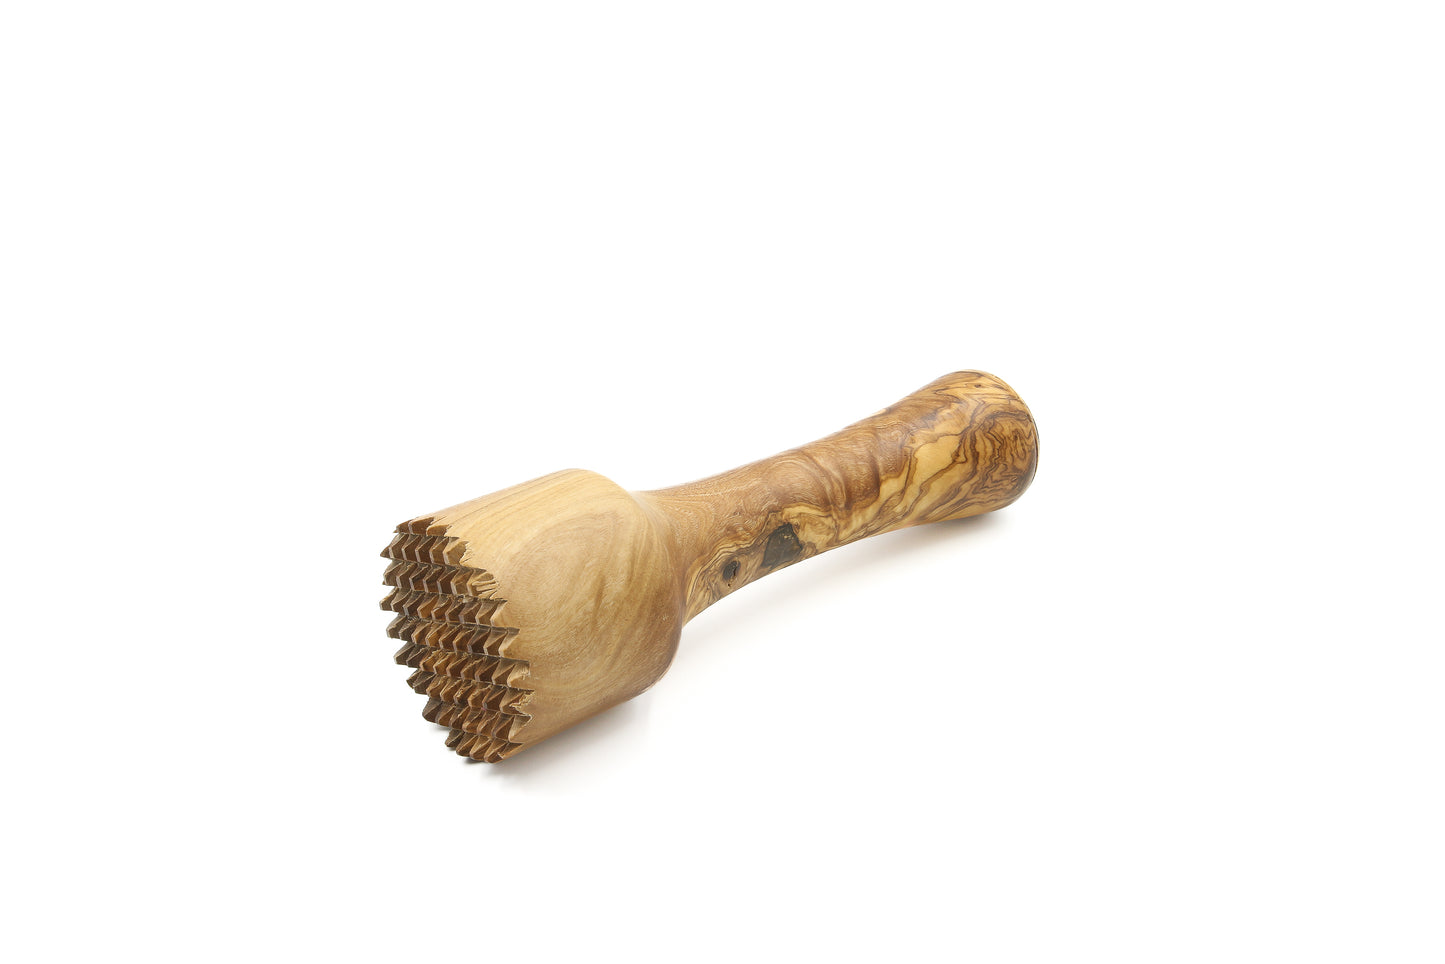 Unique olive wood tool for tenderizing and flattening meat